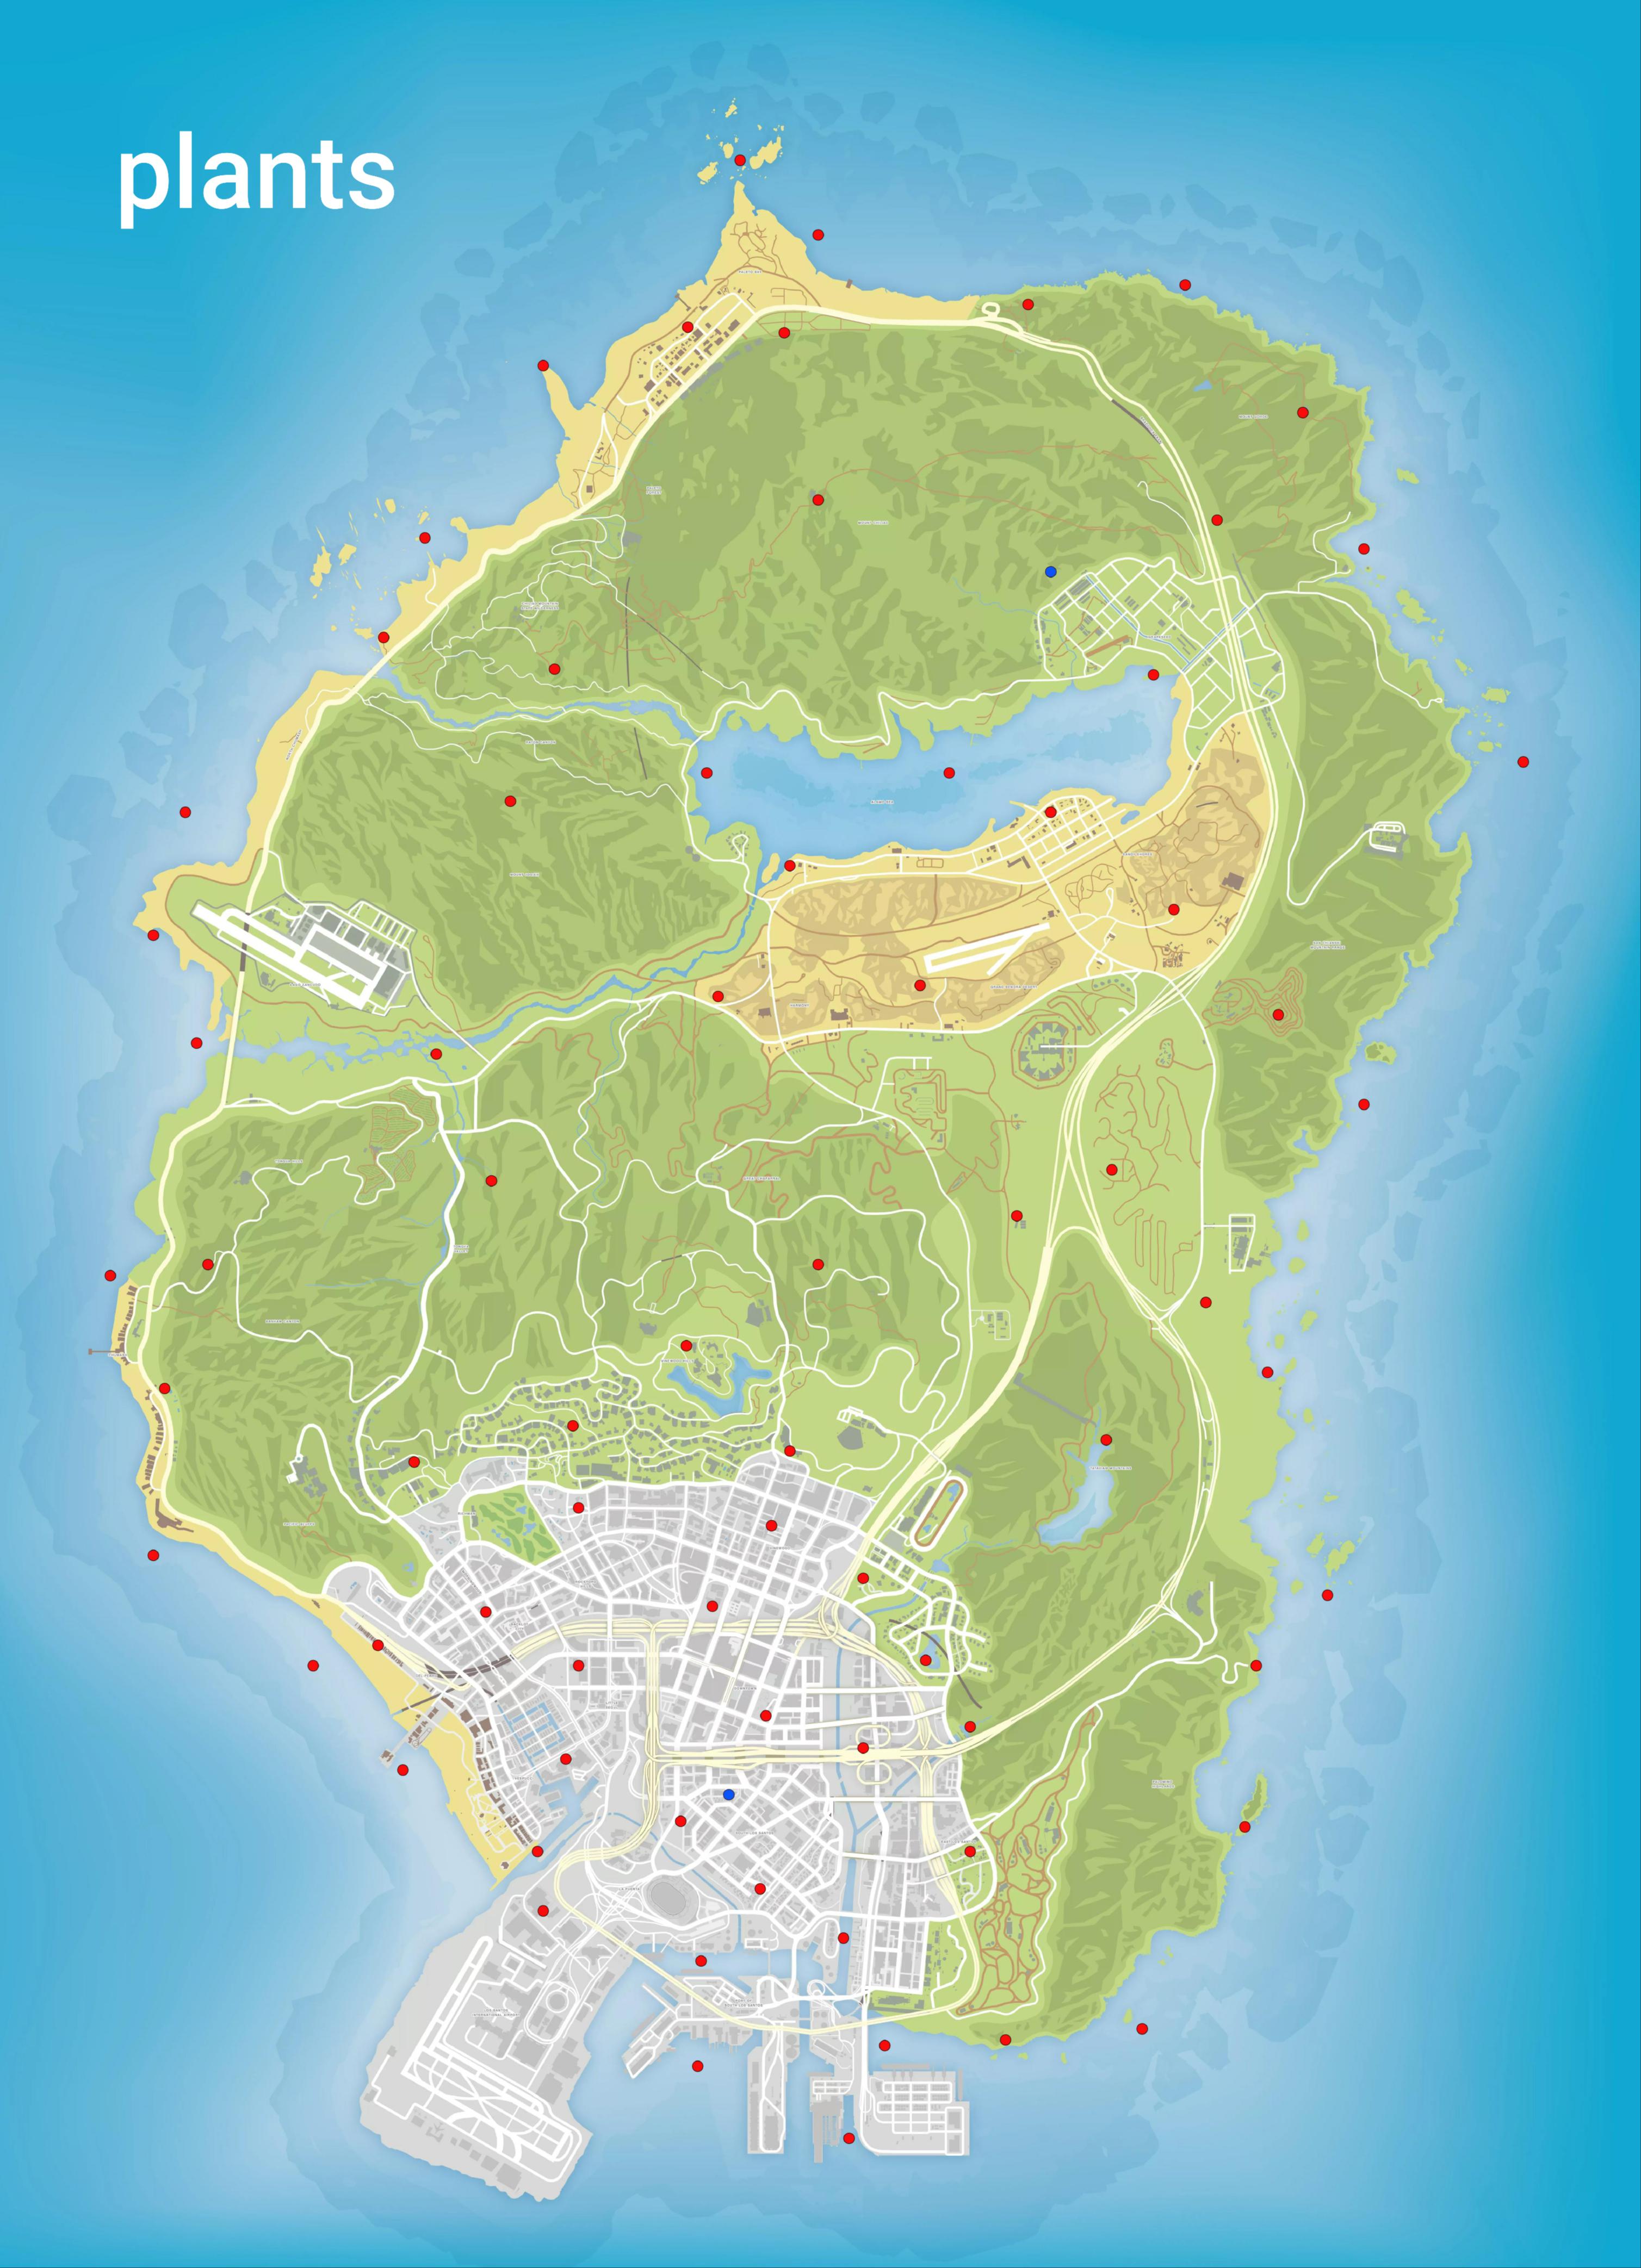 GTA Online Peyote plant locations 2020 - How to turn into animals, Bigfoot,  Chop | VG247